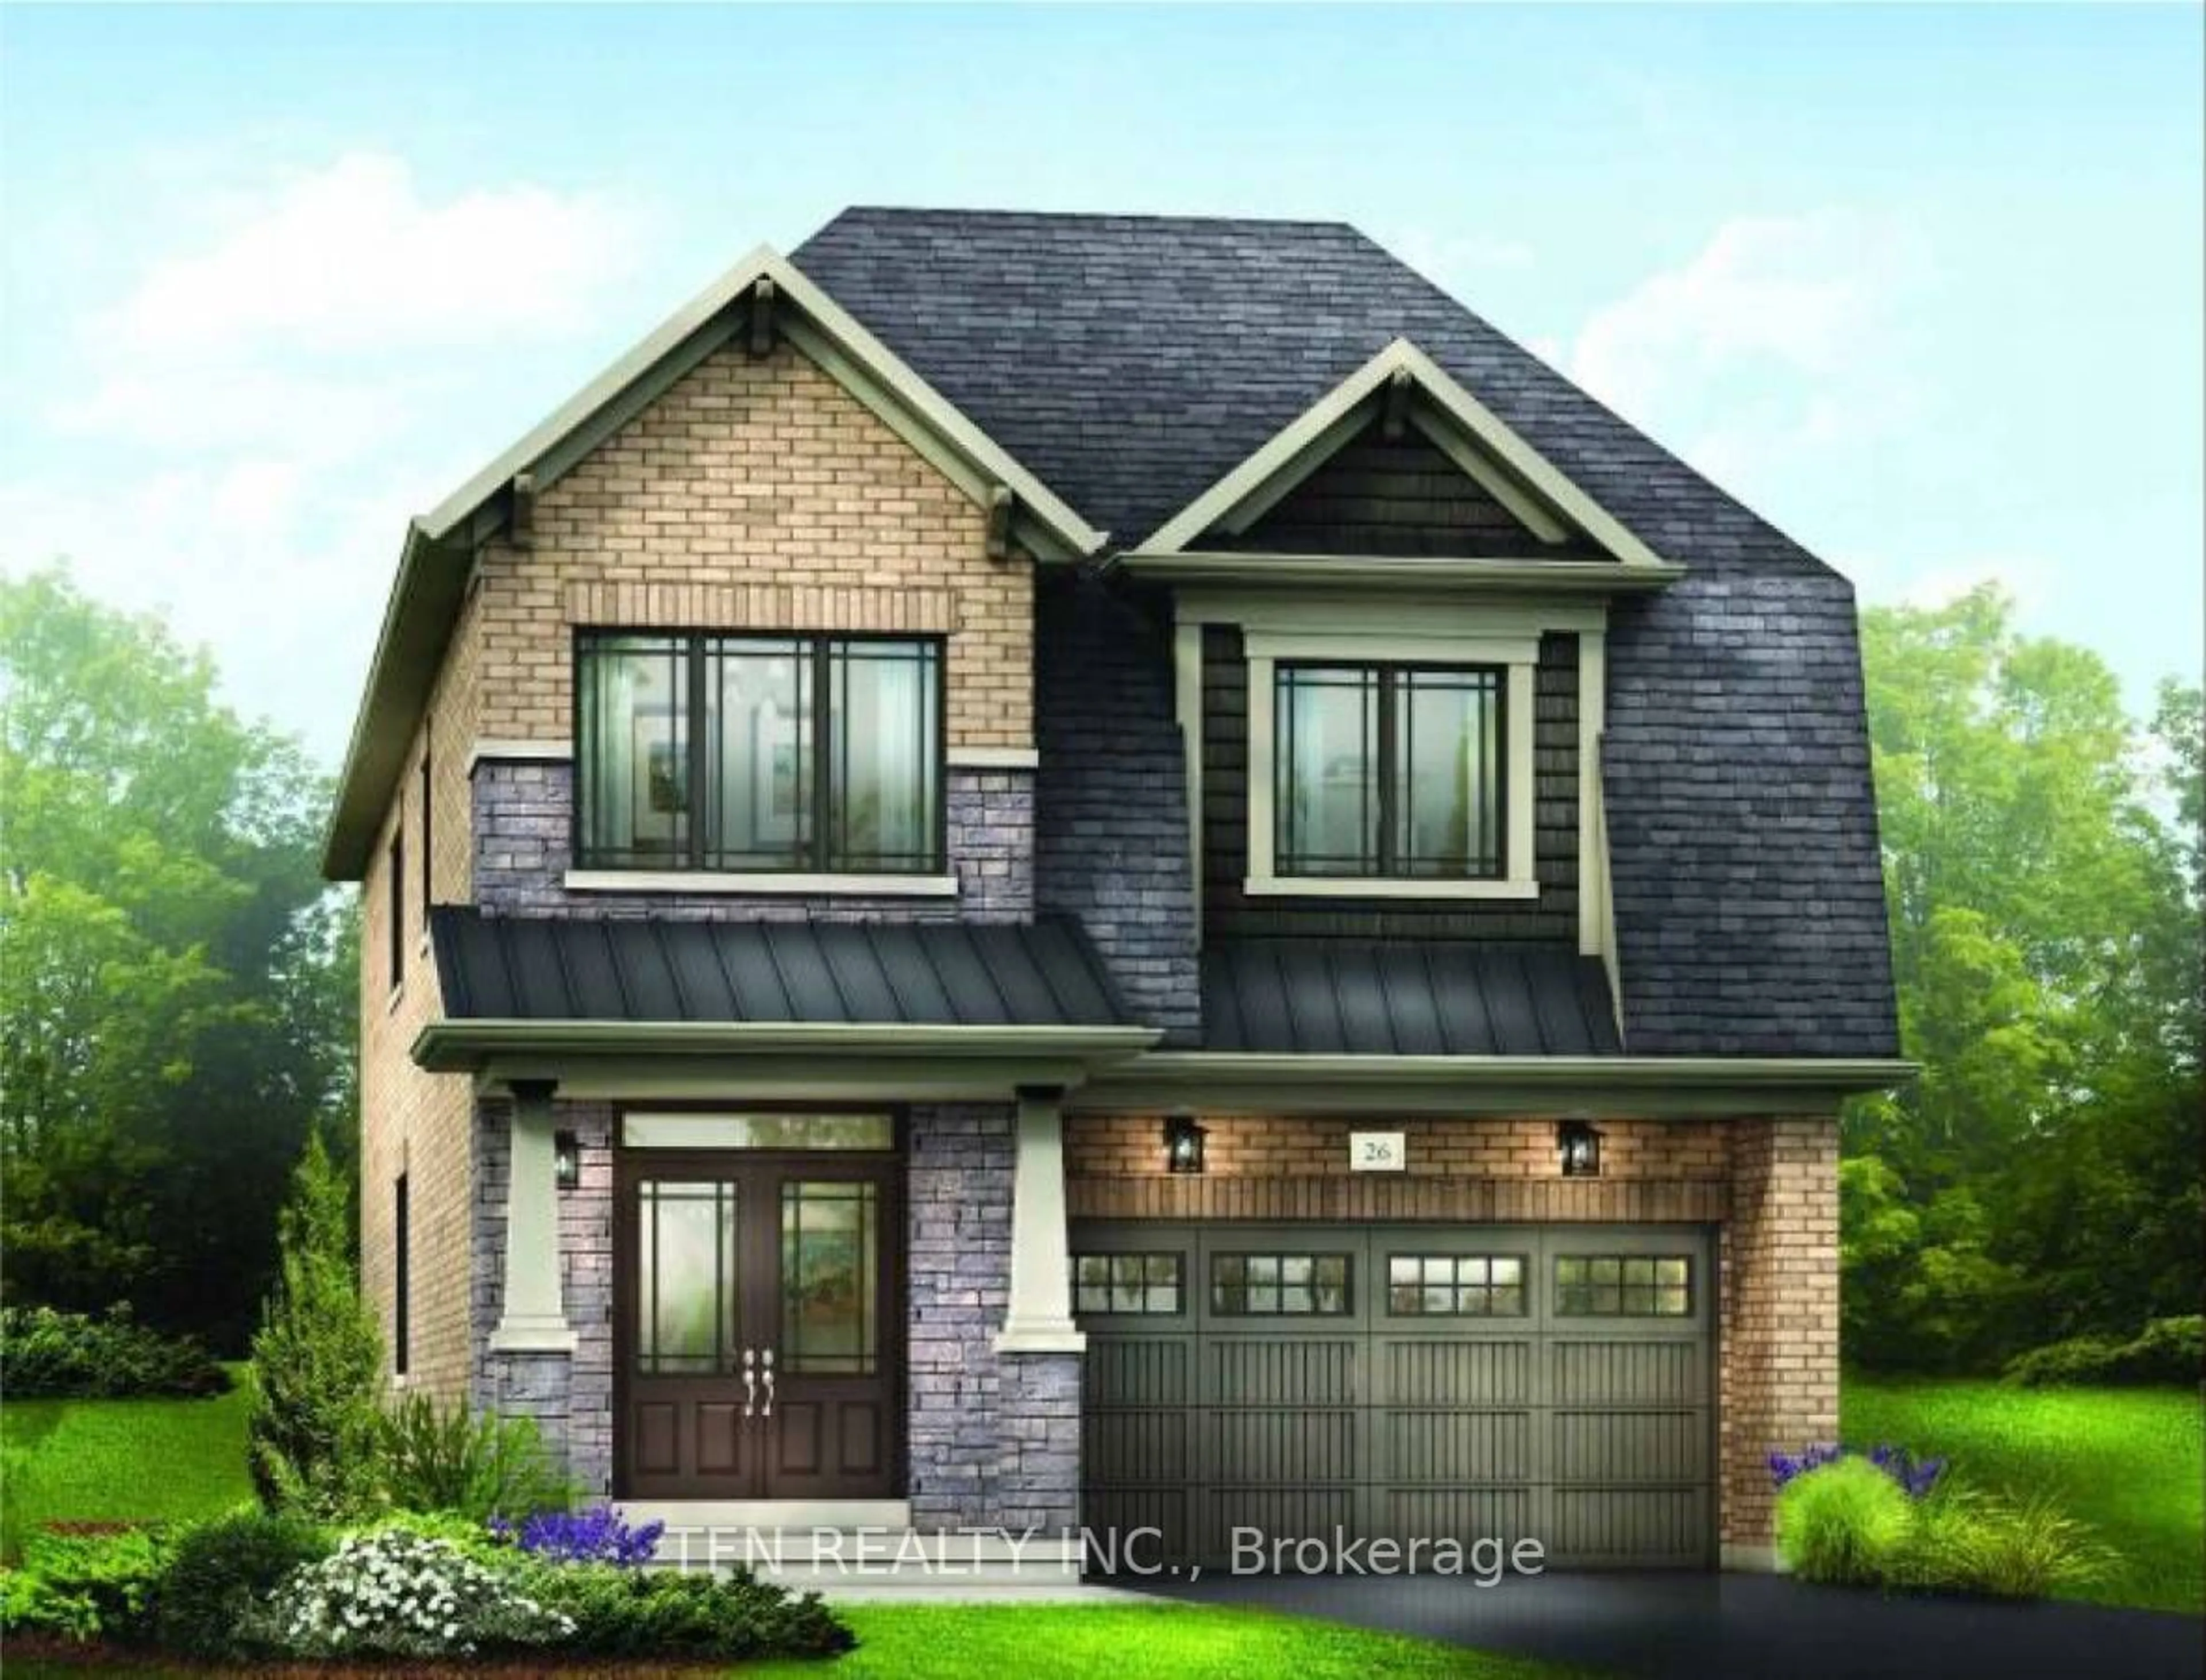 Home with brick exterior material for Lot 26 Stanley Ave, Haldimand Ontario N3W 1V6